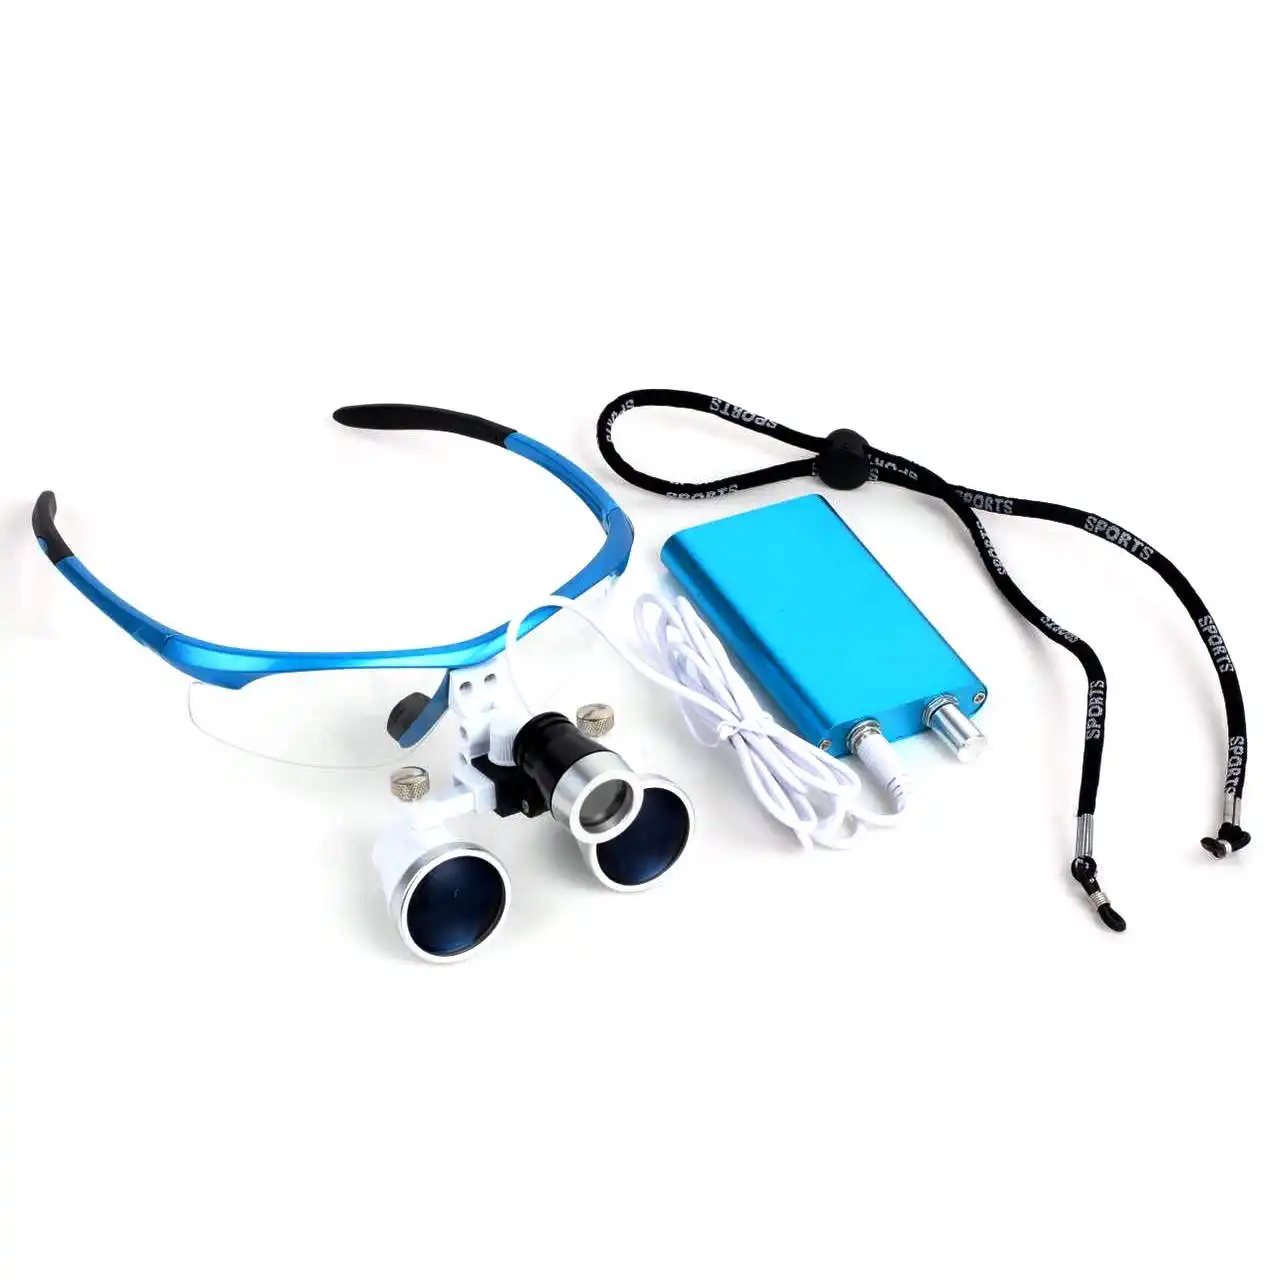 Dental Binocular Head Surgical Eye Loupes 2.5X Magnification with LED